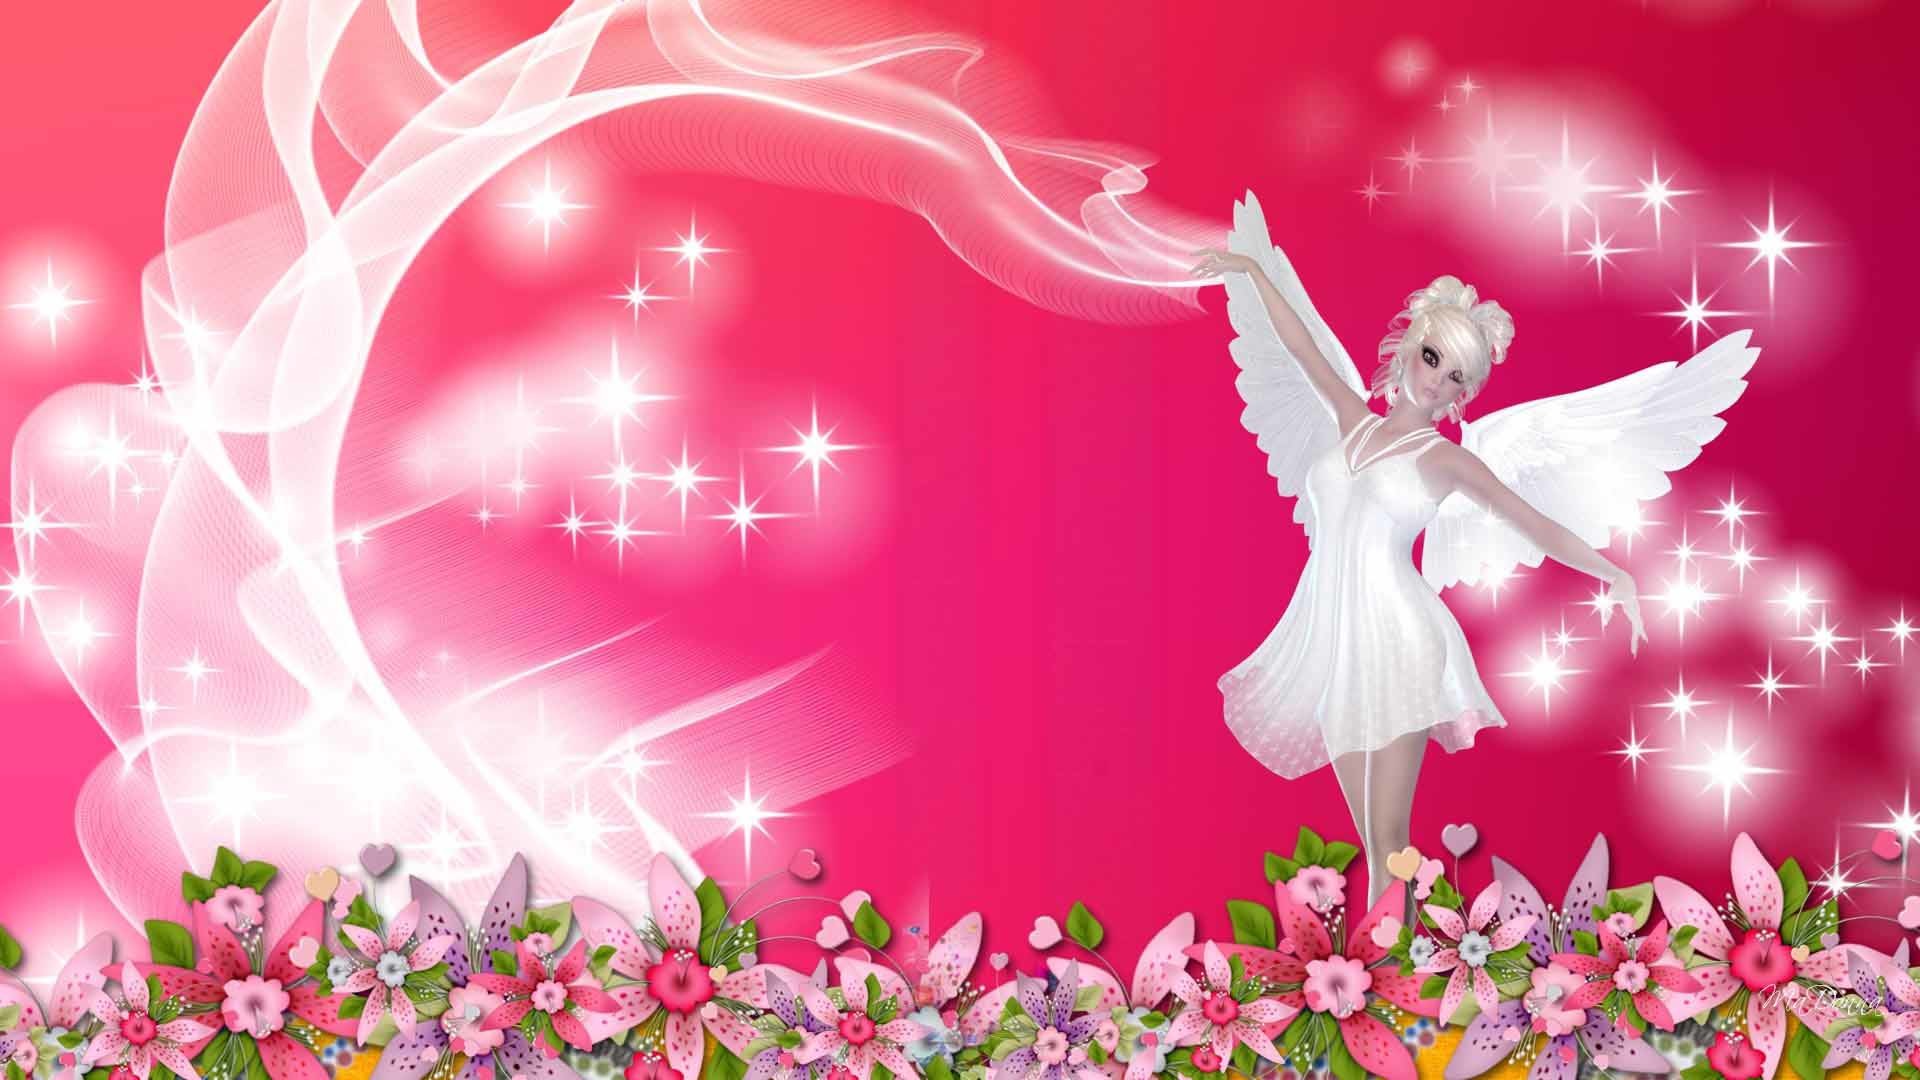 1920x1080 Images Of Fairy